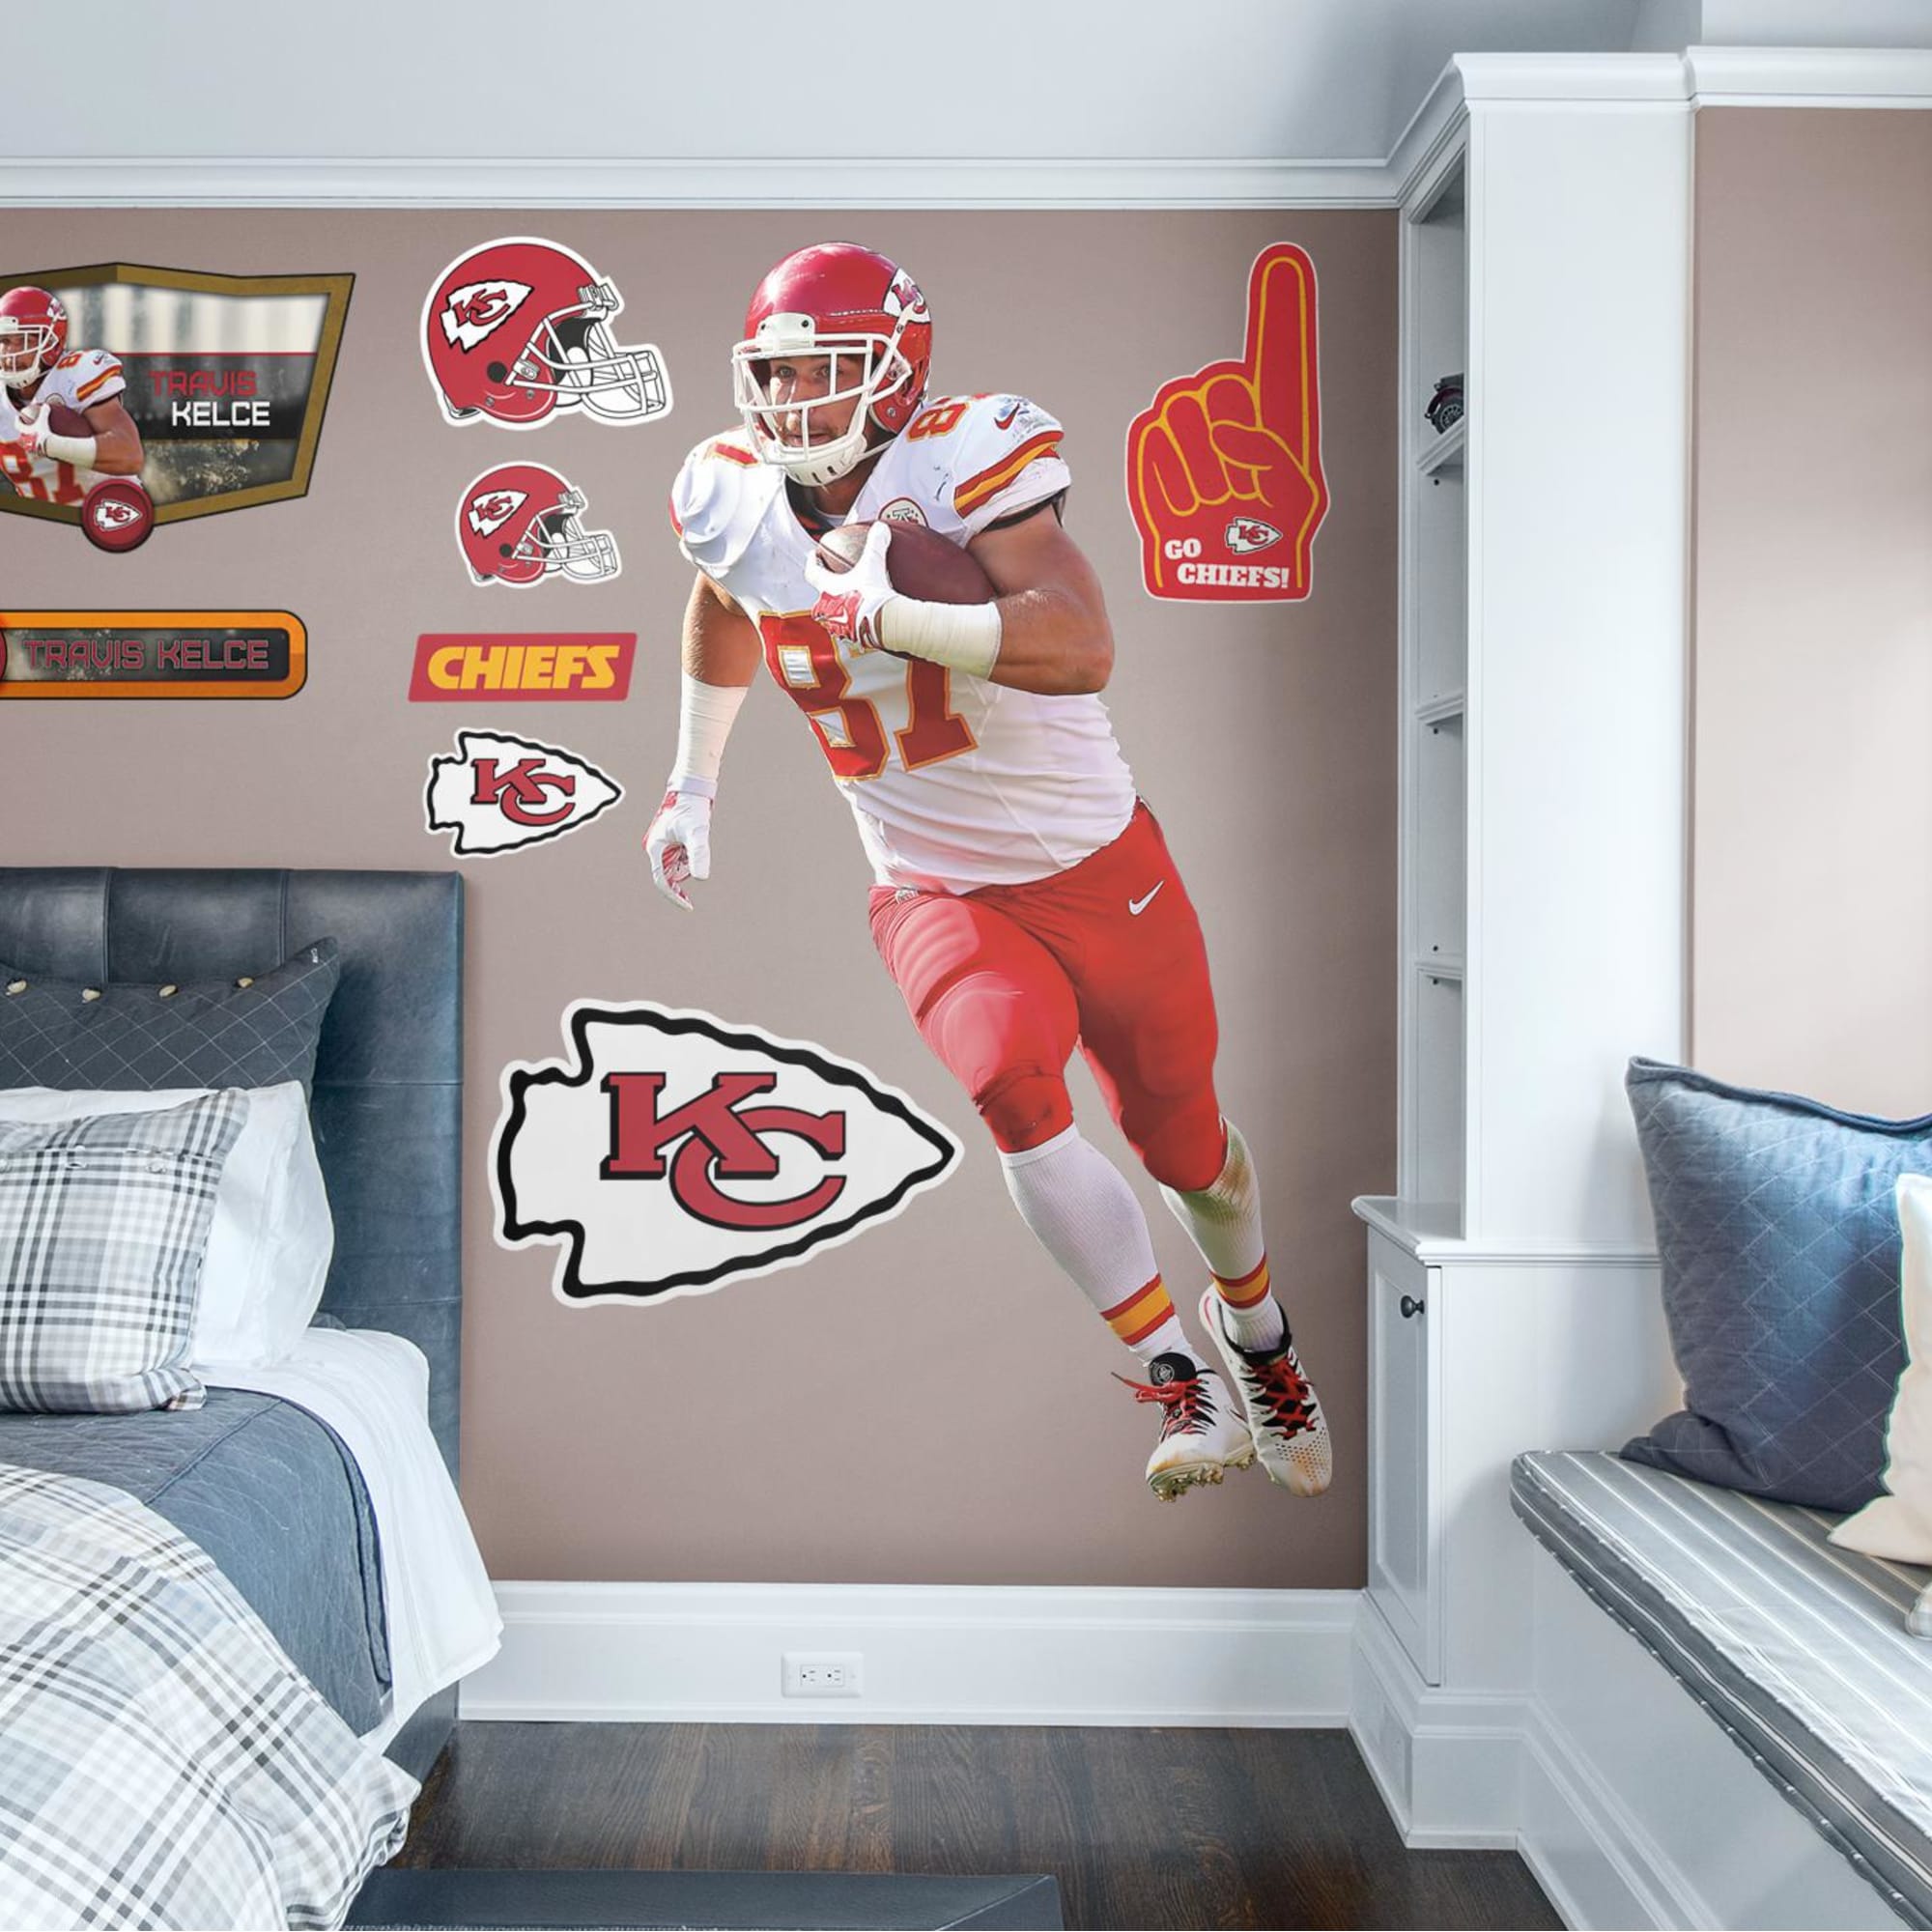 Travis Kelce for Kansas City Chiefs - Officially Licensed NFL Removable Wall Decal Life-Size Athlete + 9 Decals (43"W x 78"H) by